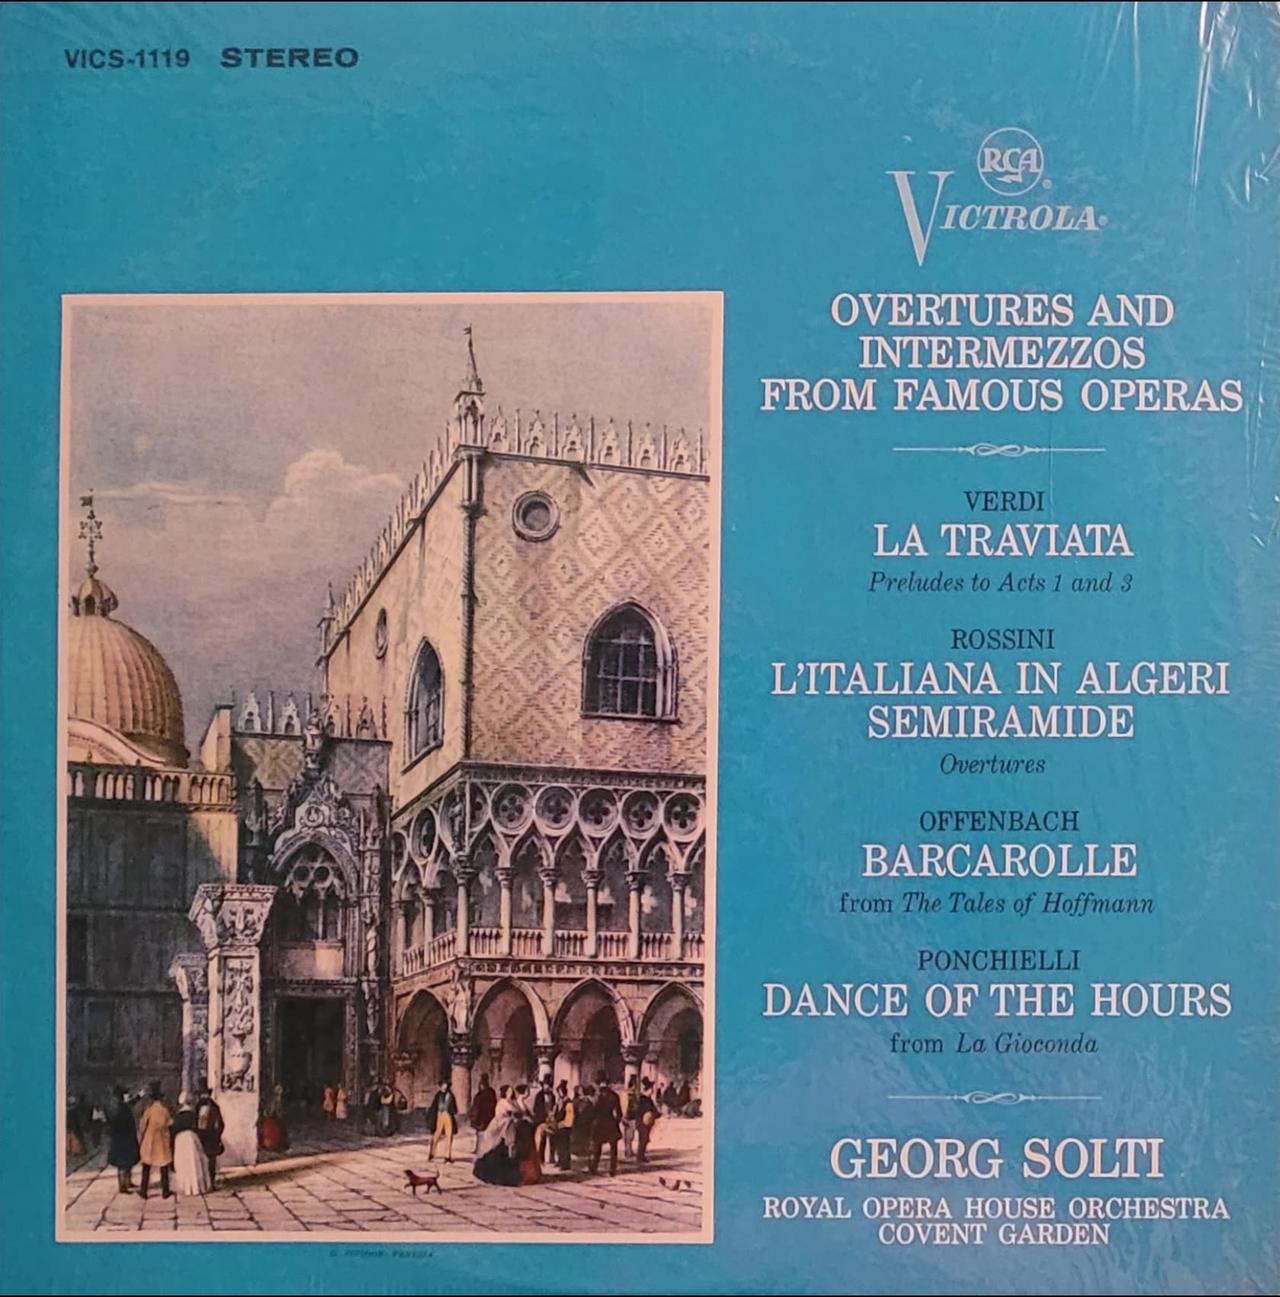 Georg Solti, Royal Opera House Orchestra Covent Garden – Overtures & Intermezzos From Famous Operas